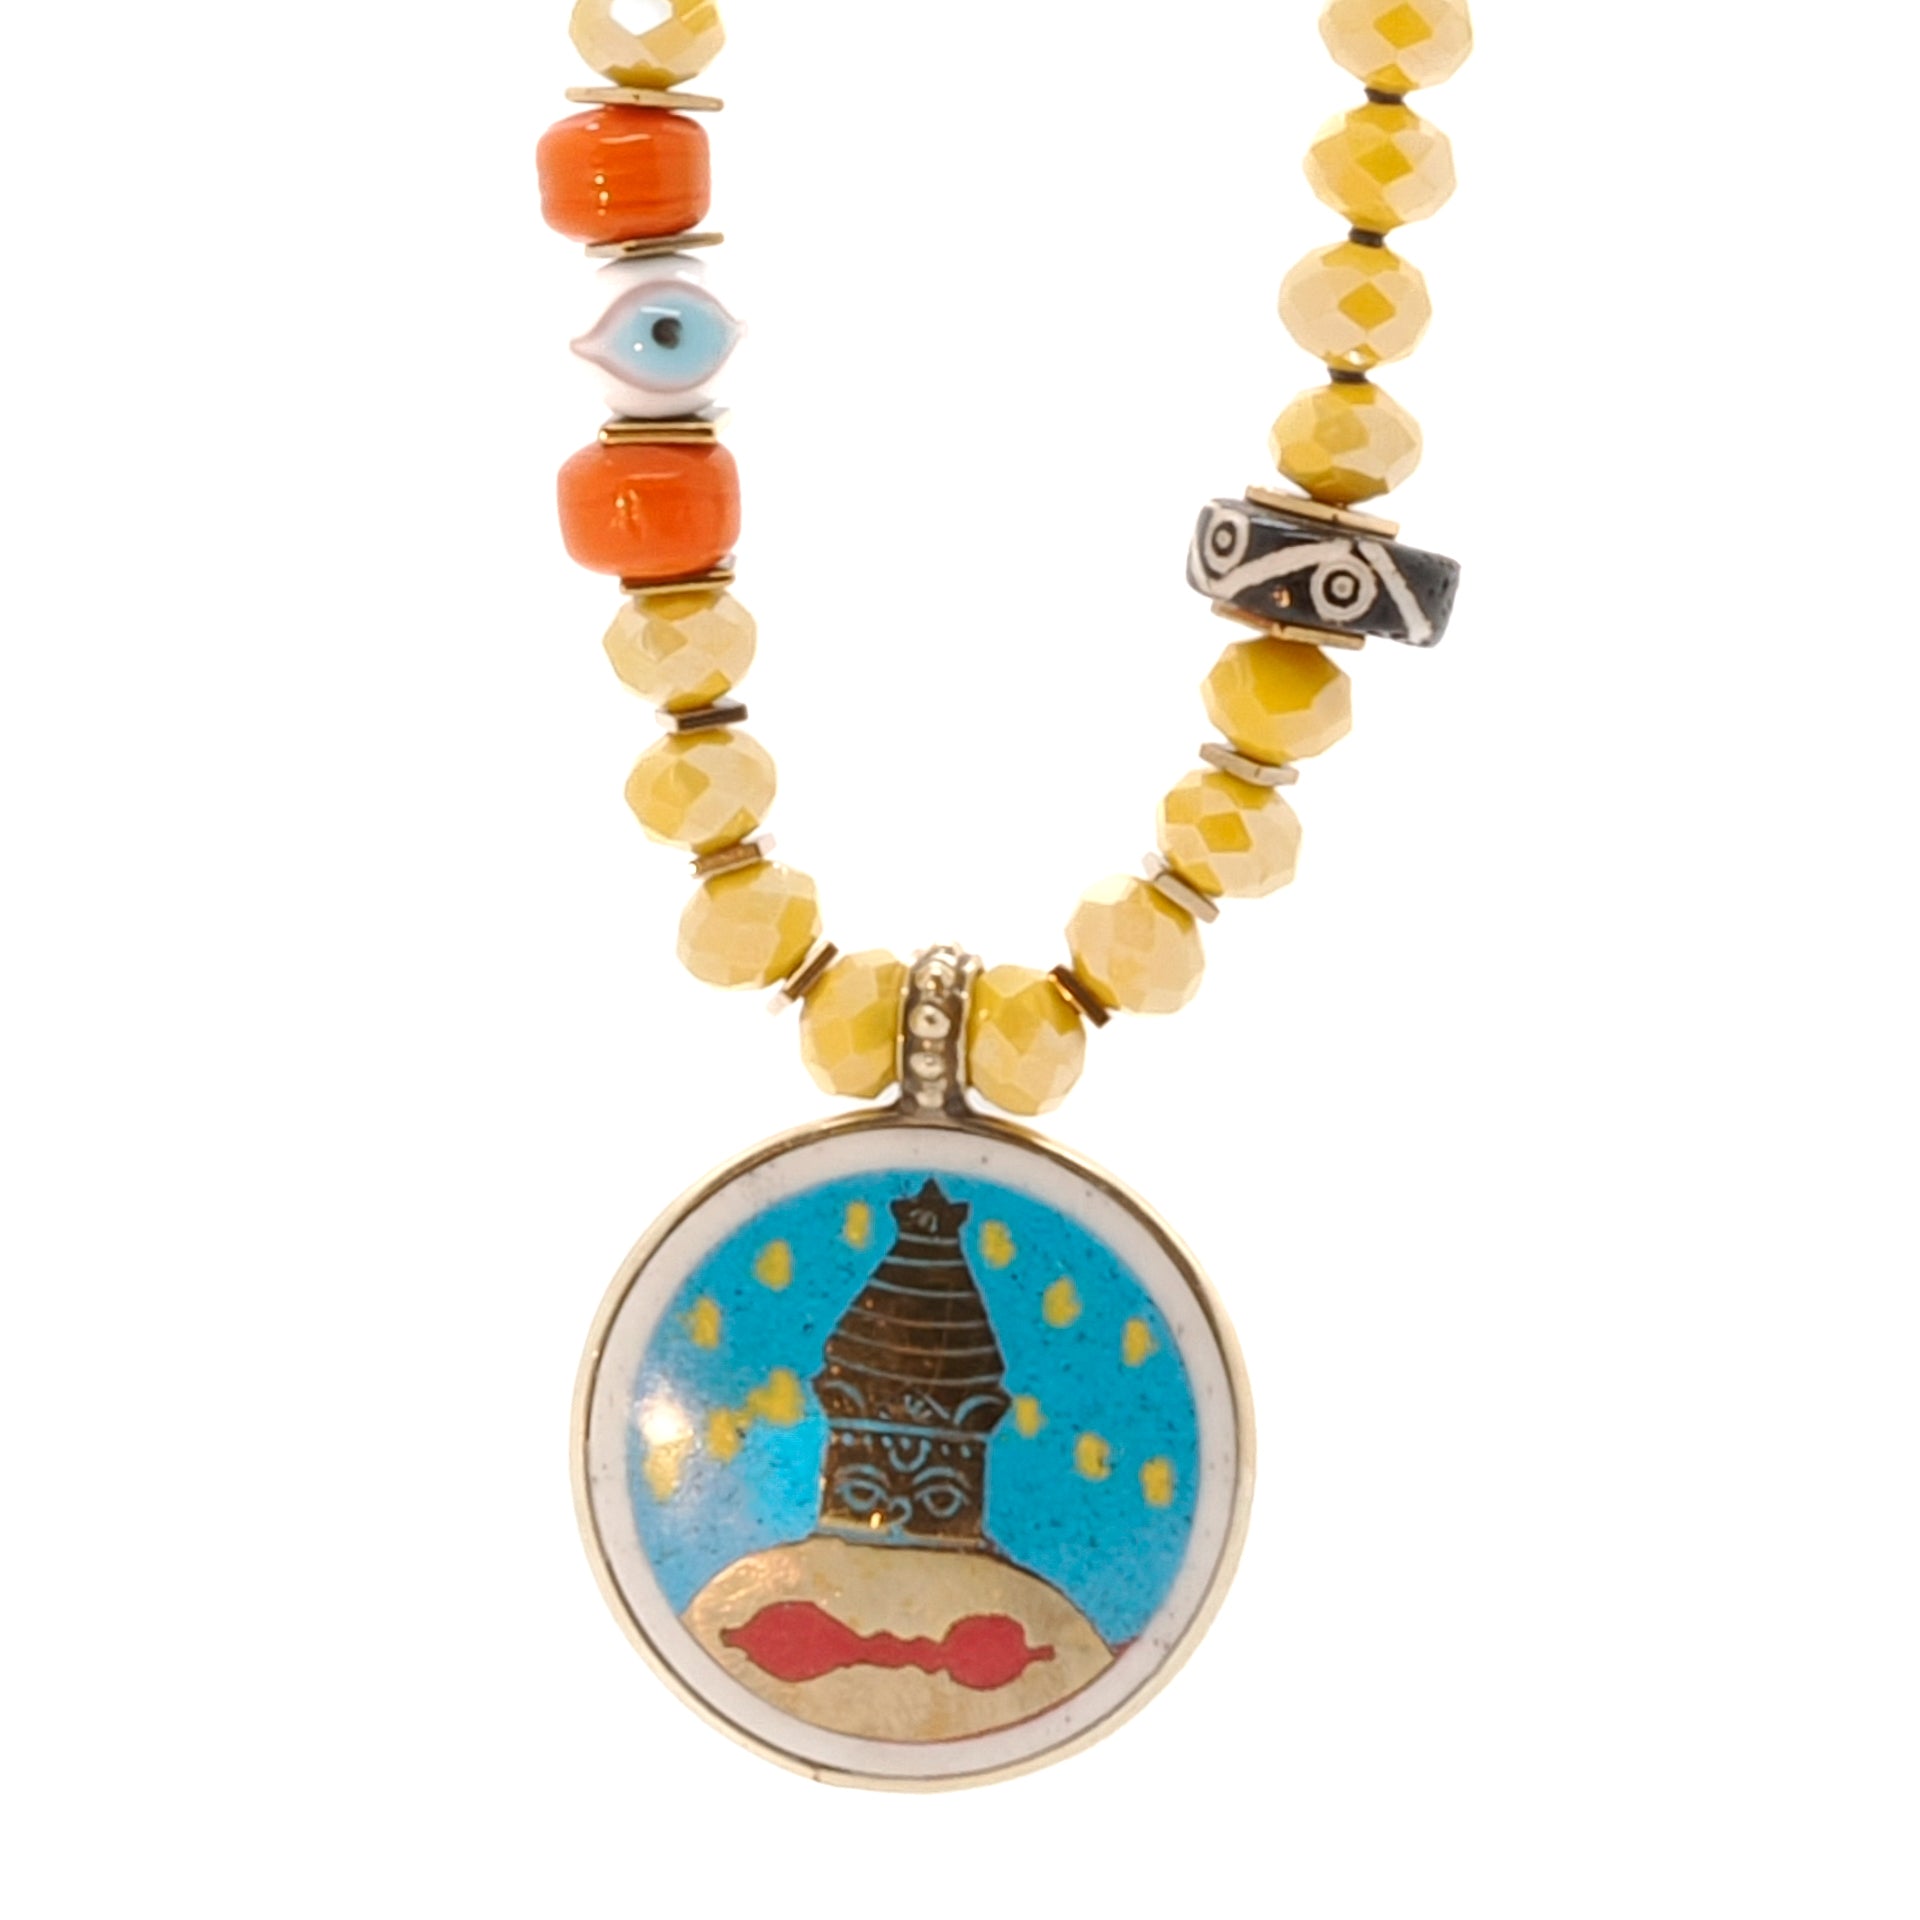 Find inner peace and balance with the Yoga Serenity Necklace adorned with Buddha Eyes and Om Mantra.